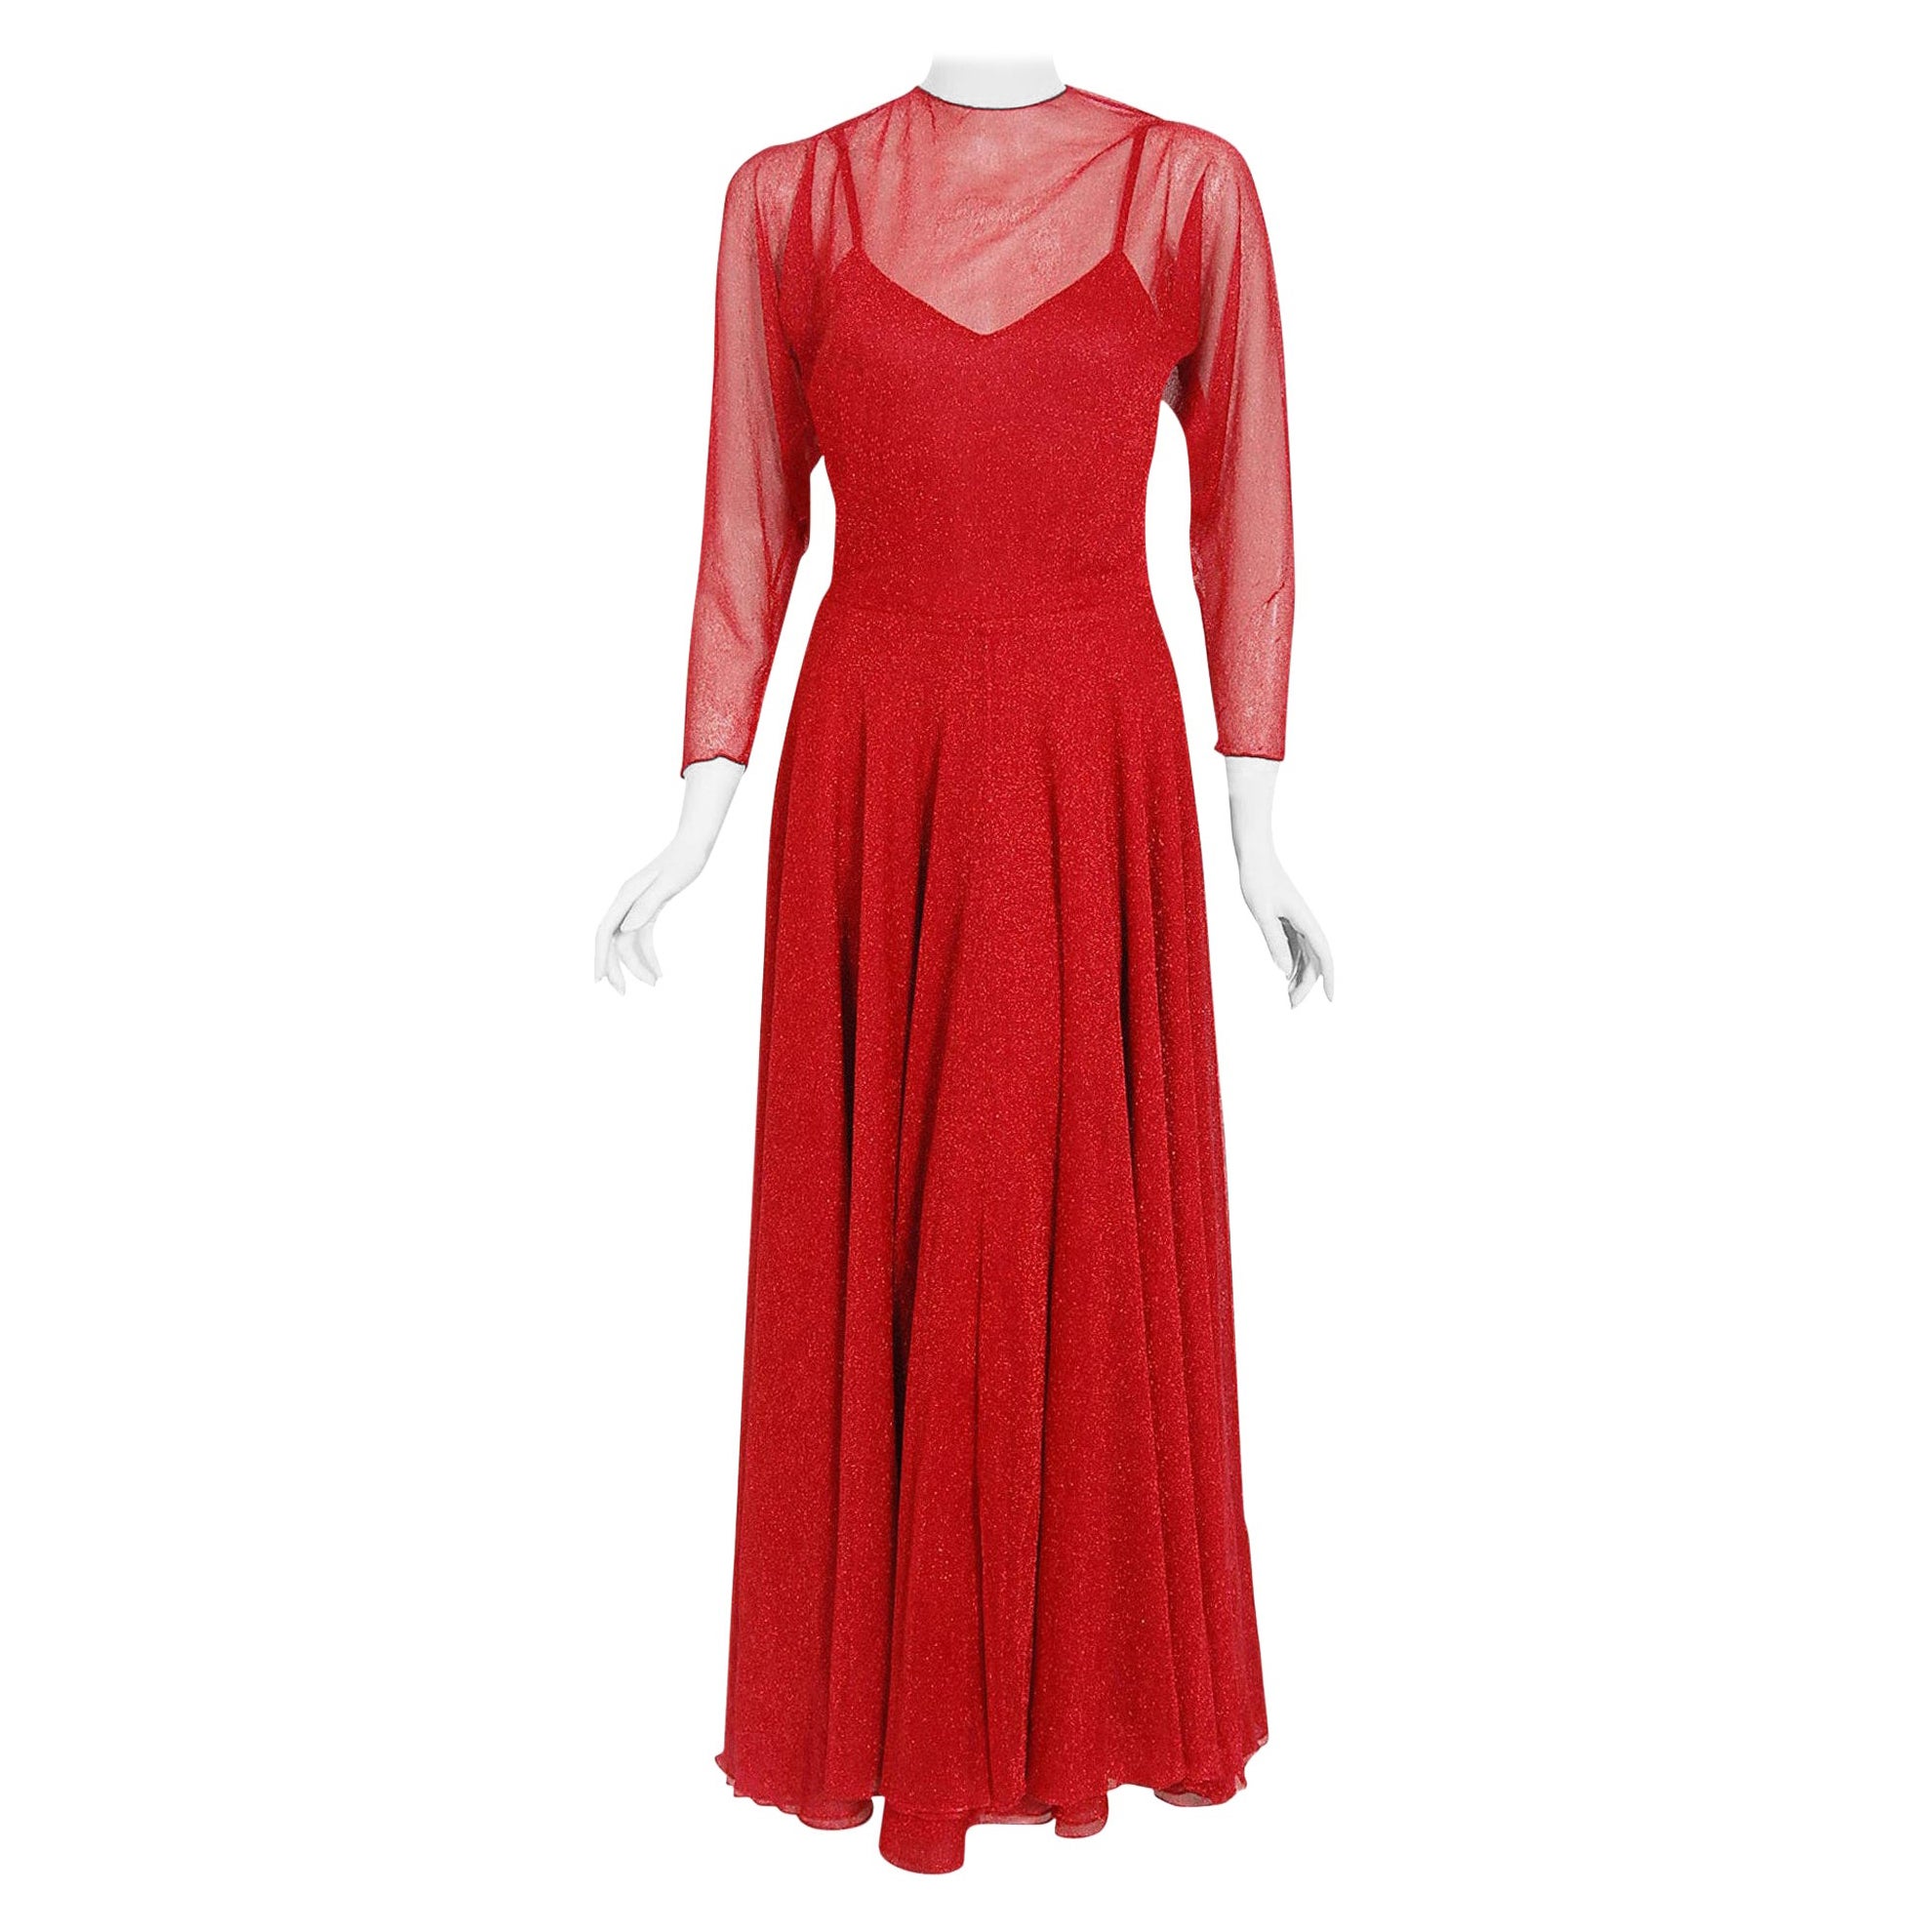 1970's Halston Couture Metallic Red Sheer Lurex Knit Long-Sleeve Maxi Dress Gown For Sale